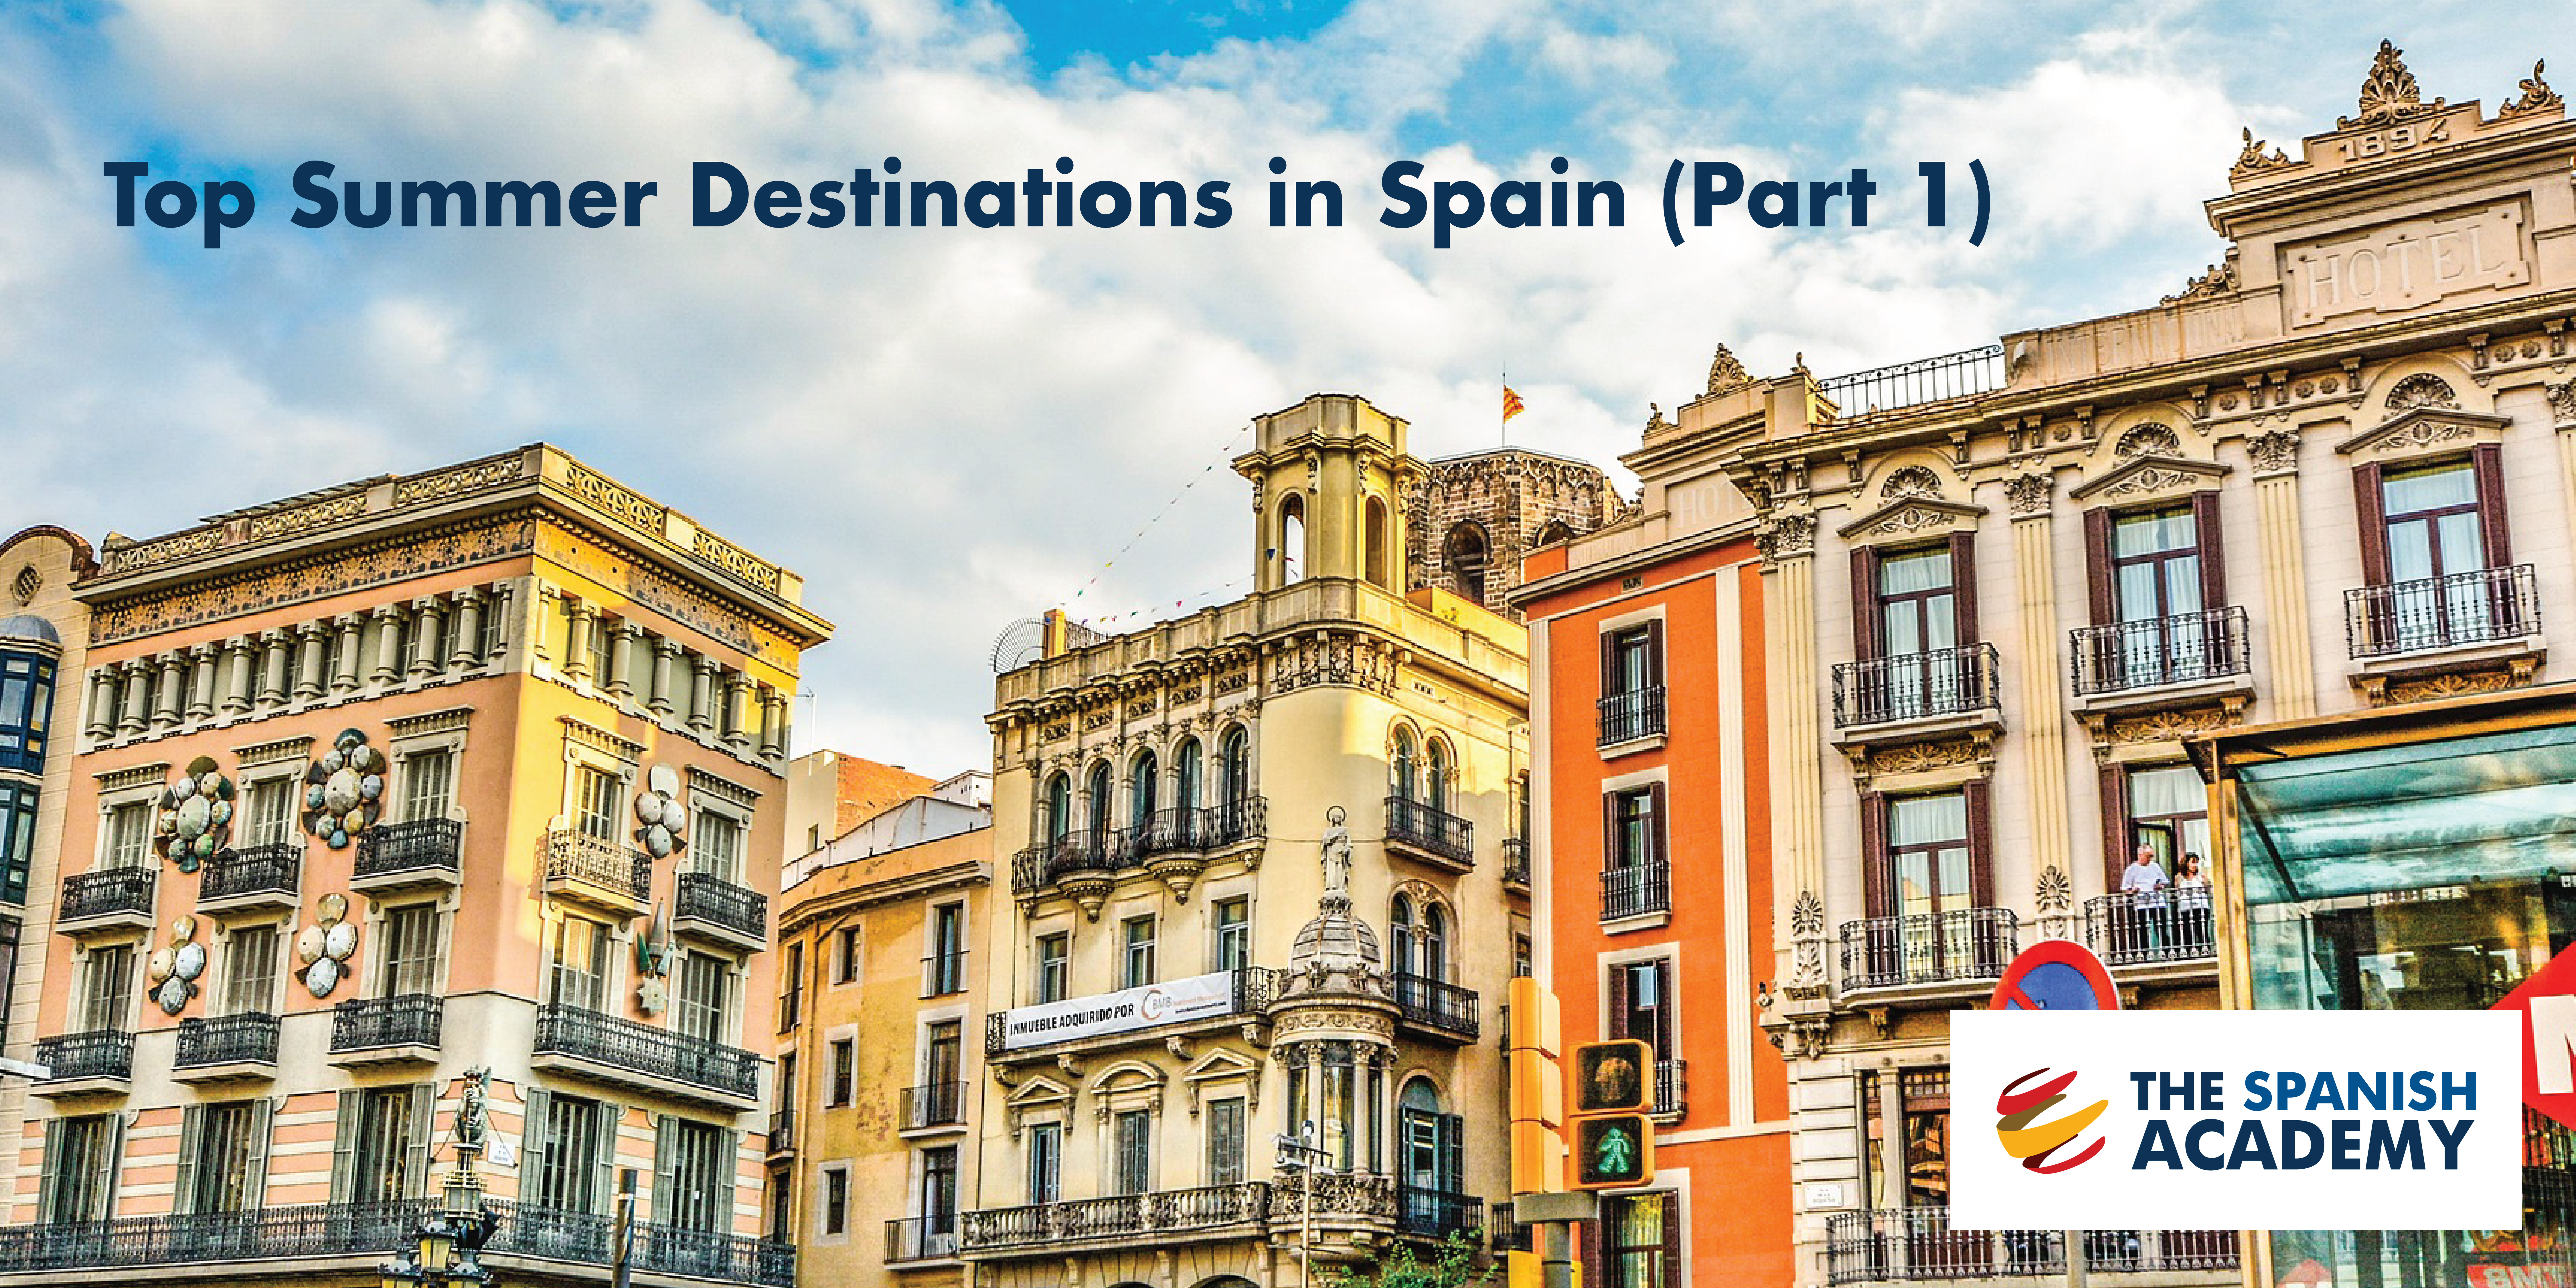 Top Summer Destinations in Spain (Part 1) - The Spanish Academy Blog